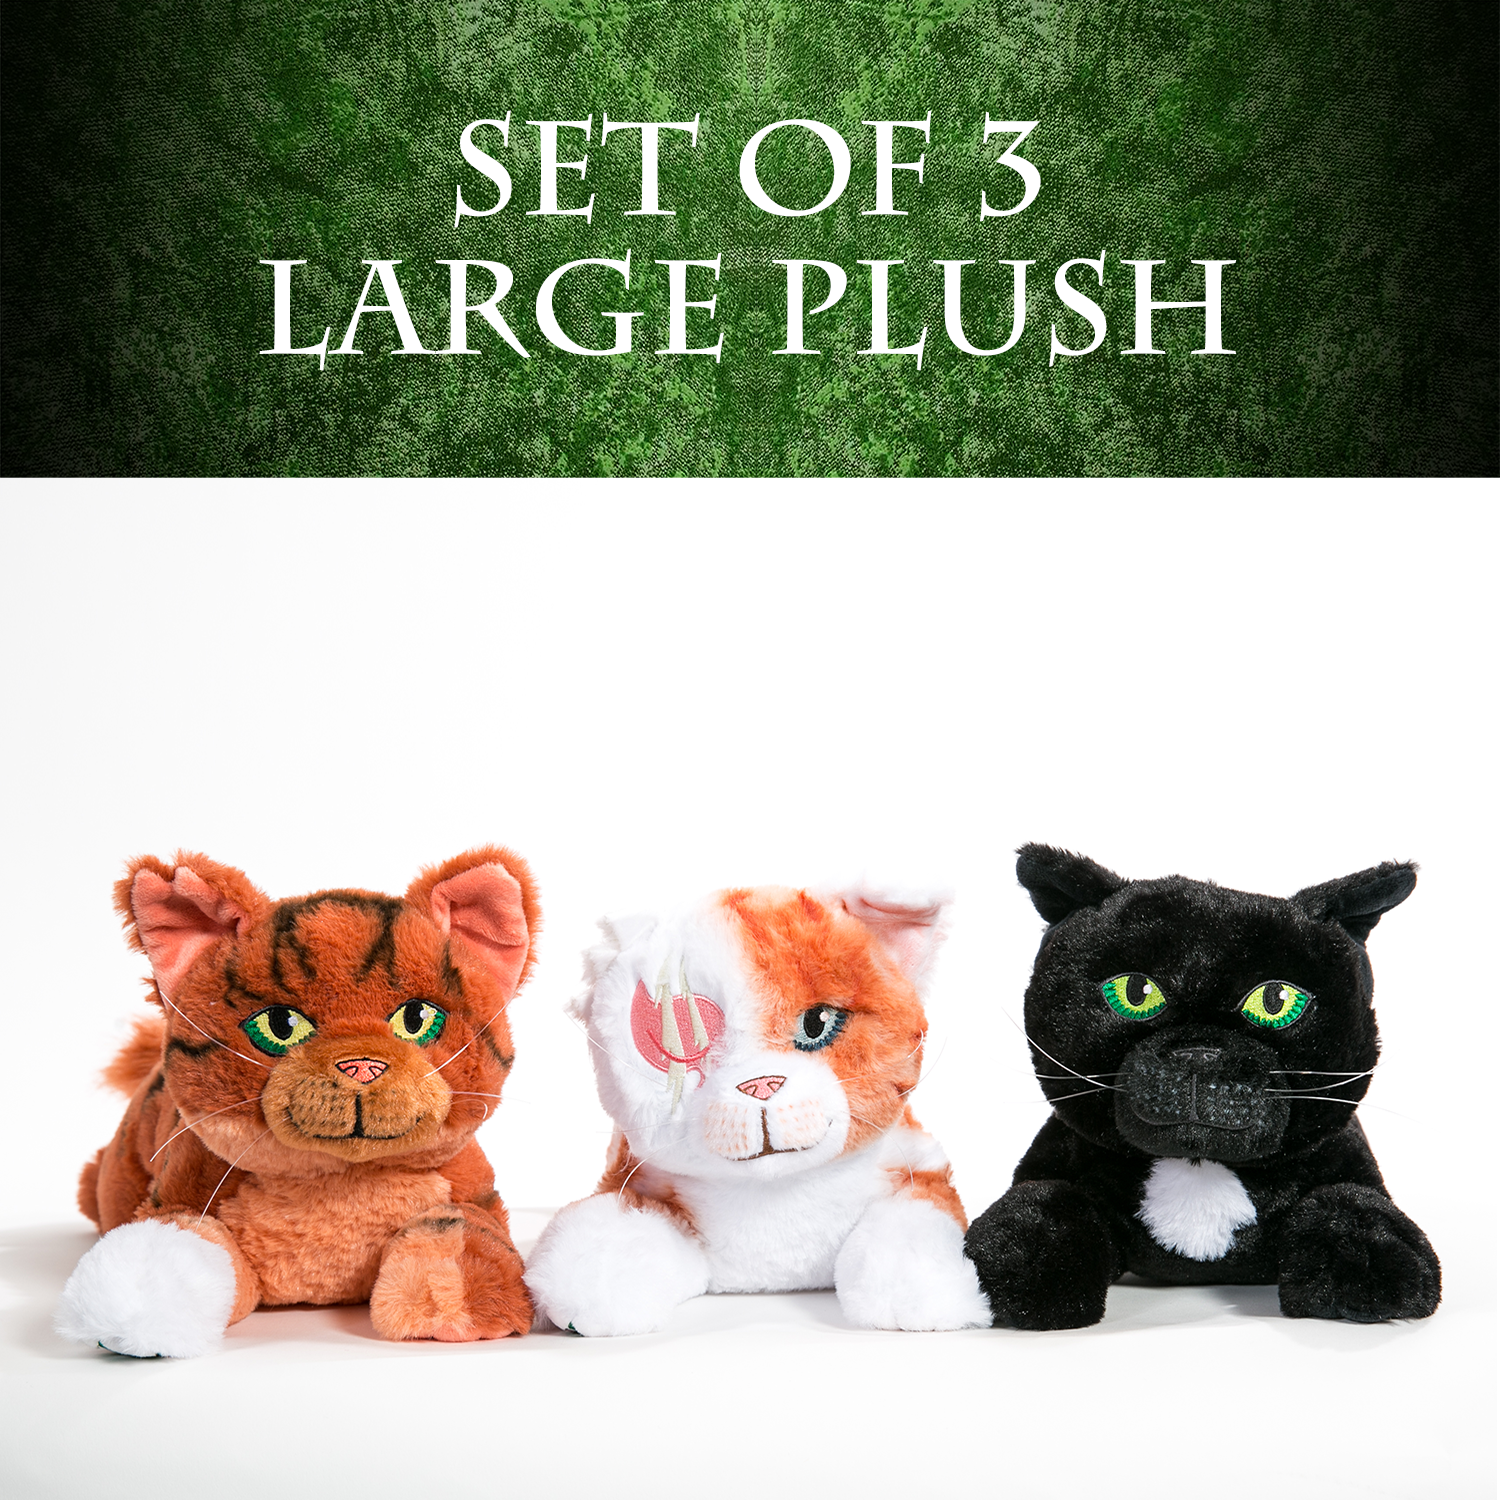 Warrior Cats Villains Gifts & Merchandise for Sale